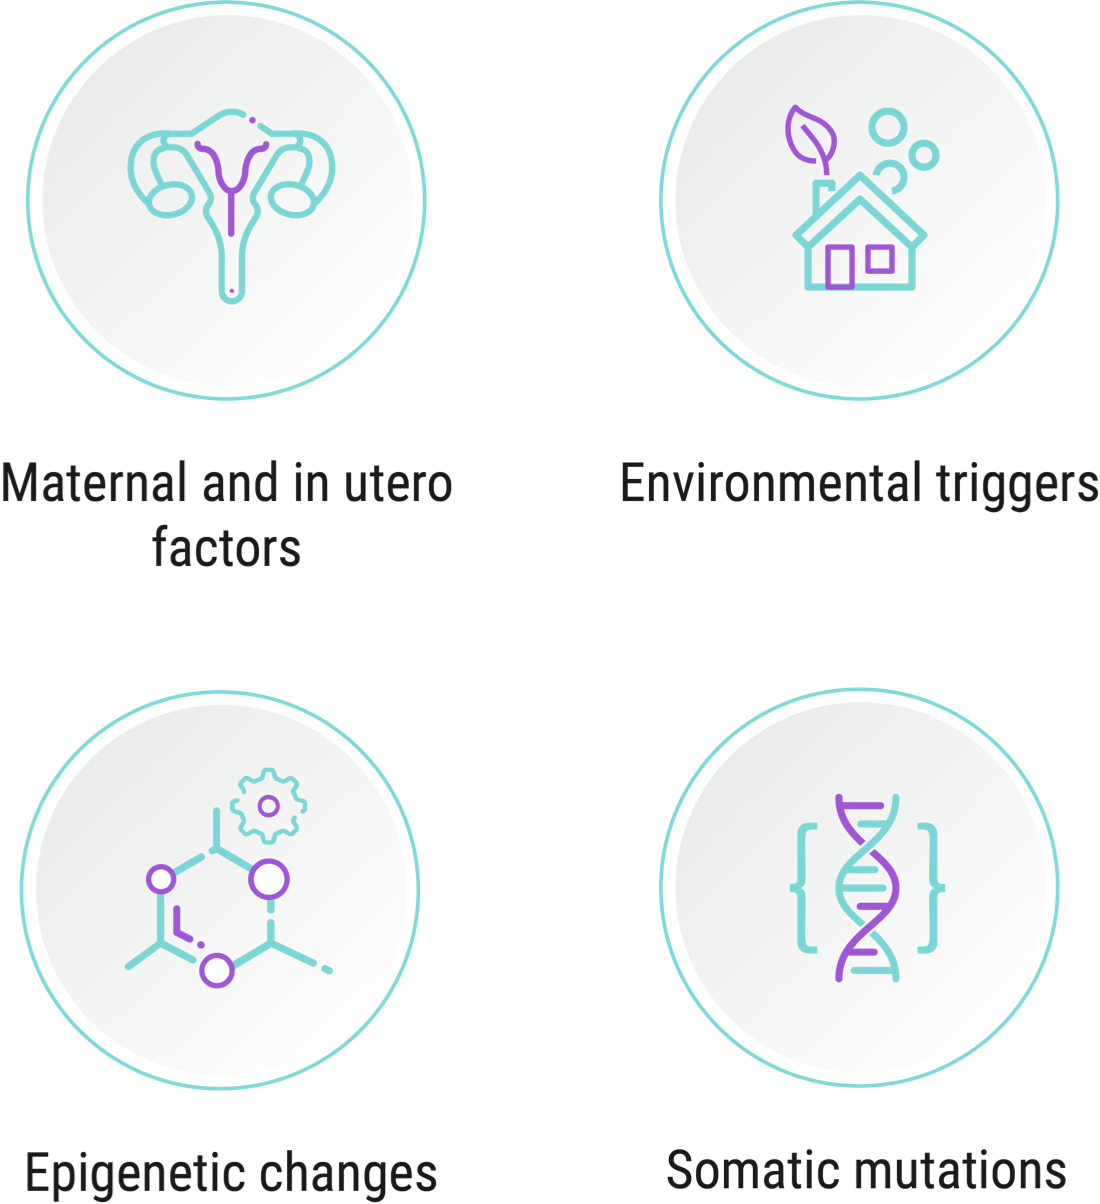 Icons of: maternal and in utero factors; environmental triggers; epigenetic changes; somatic mutations